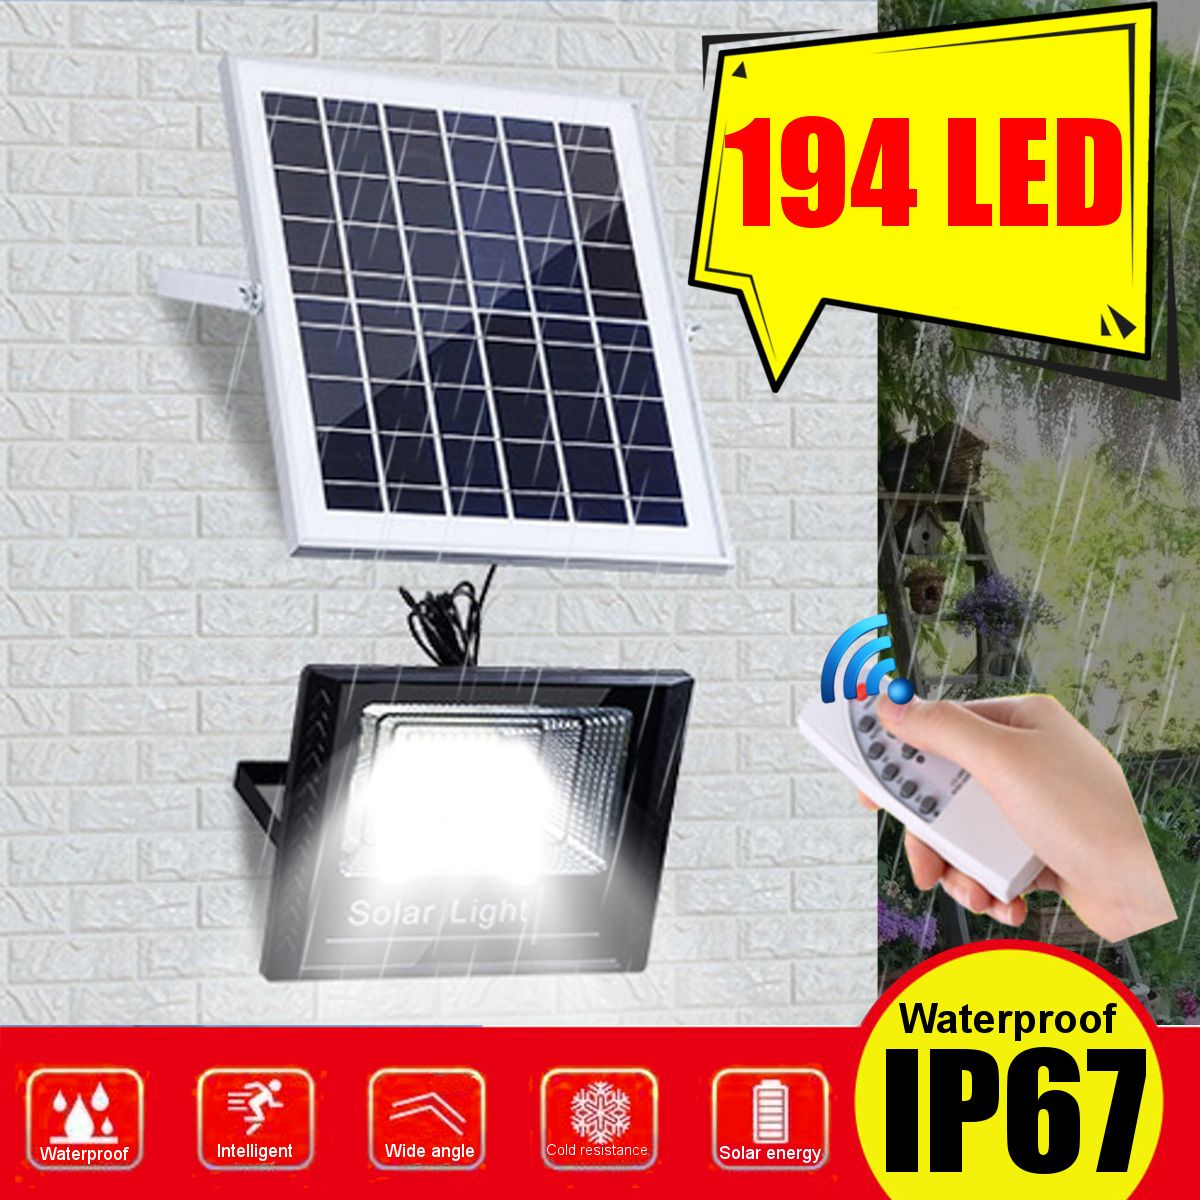 Motion-Sensor-Infrared-194LED-Solar-Wall-Light-Waterproof-Remnote-Control-Garden-Lamp-for-Home-Outdo-1769839